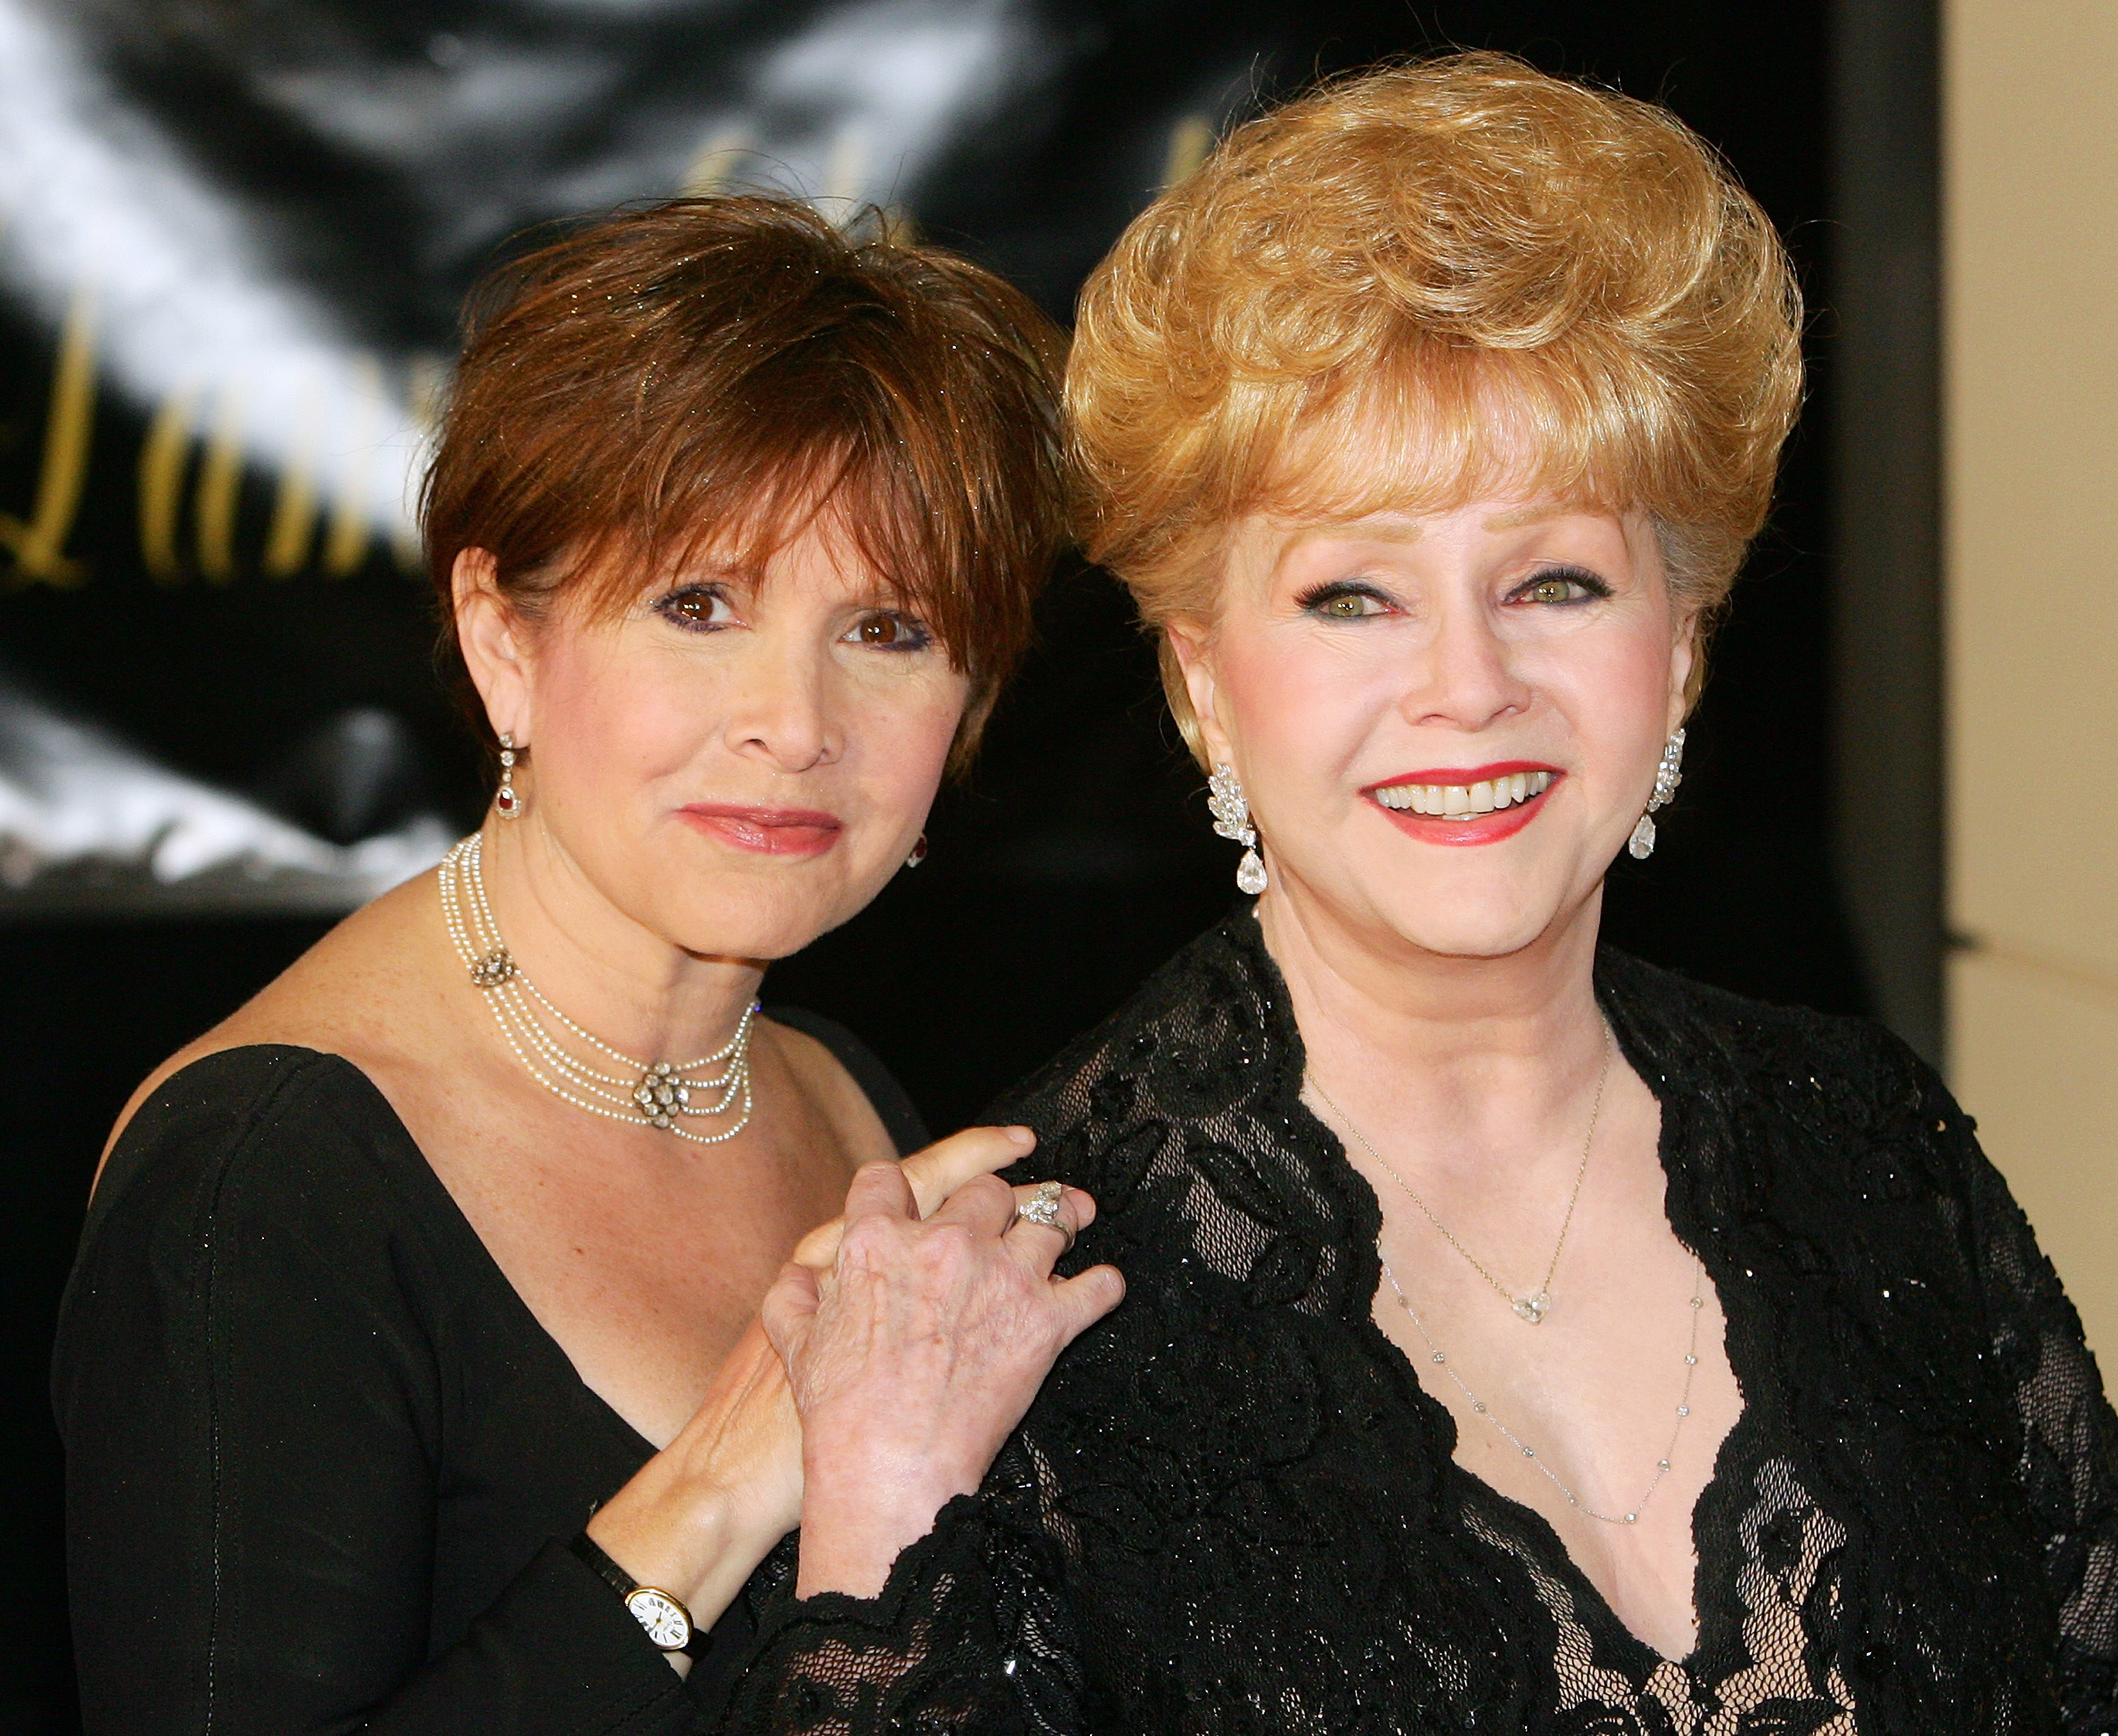 Carrie Fisher stands to the right of her mother, Debbie Reynolds. Both are dressed up for an event.